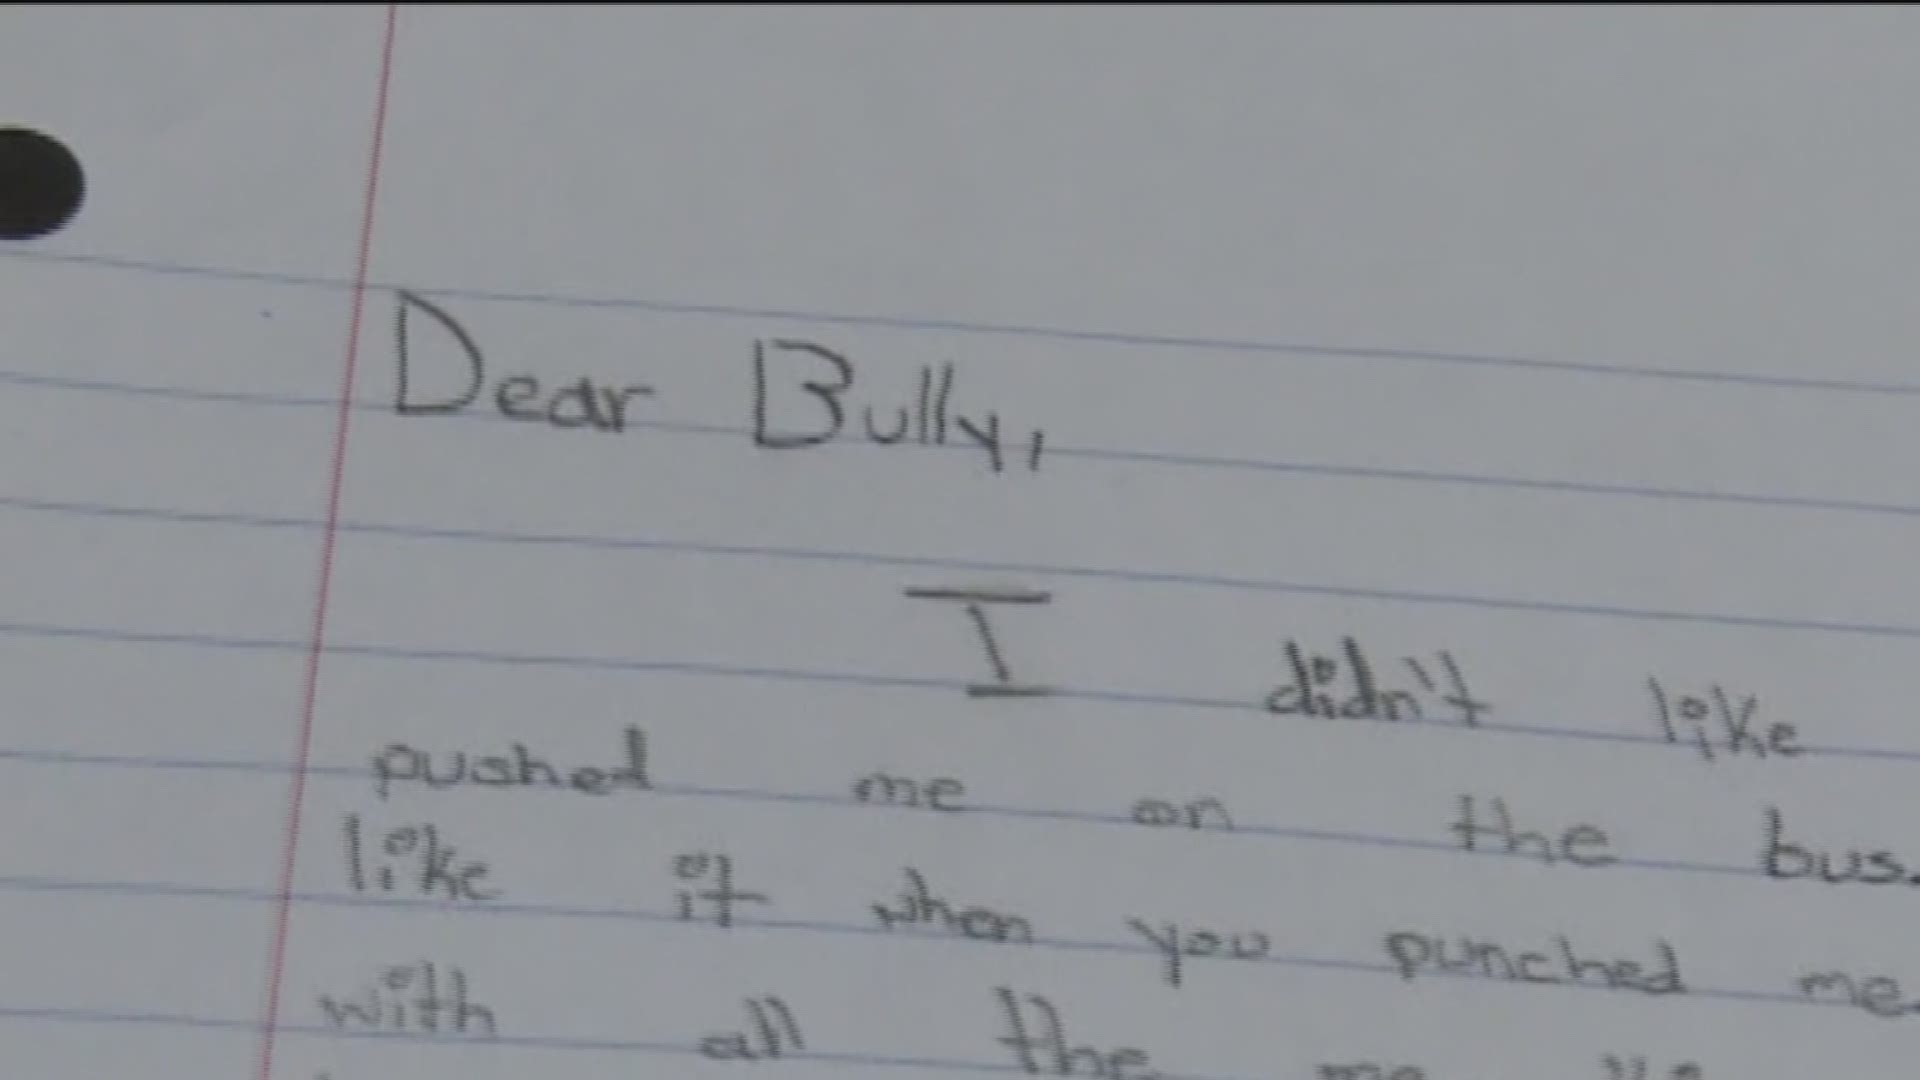 'I Will Not Bully" is an initiative to help stop bullying before it even begins to be a problem.